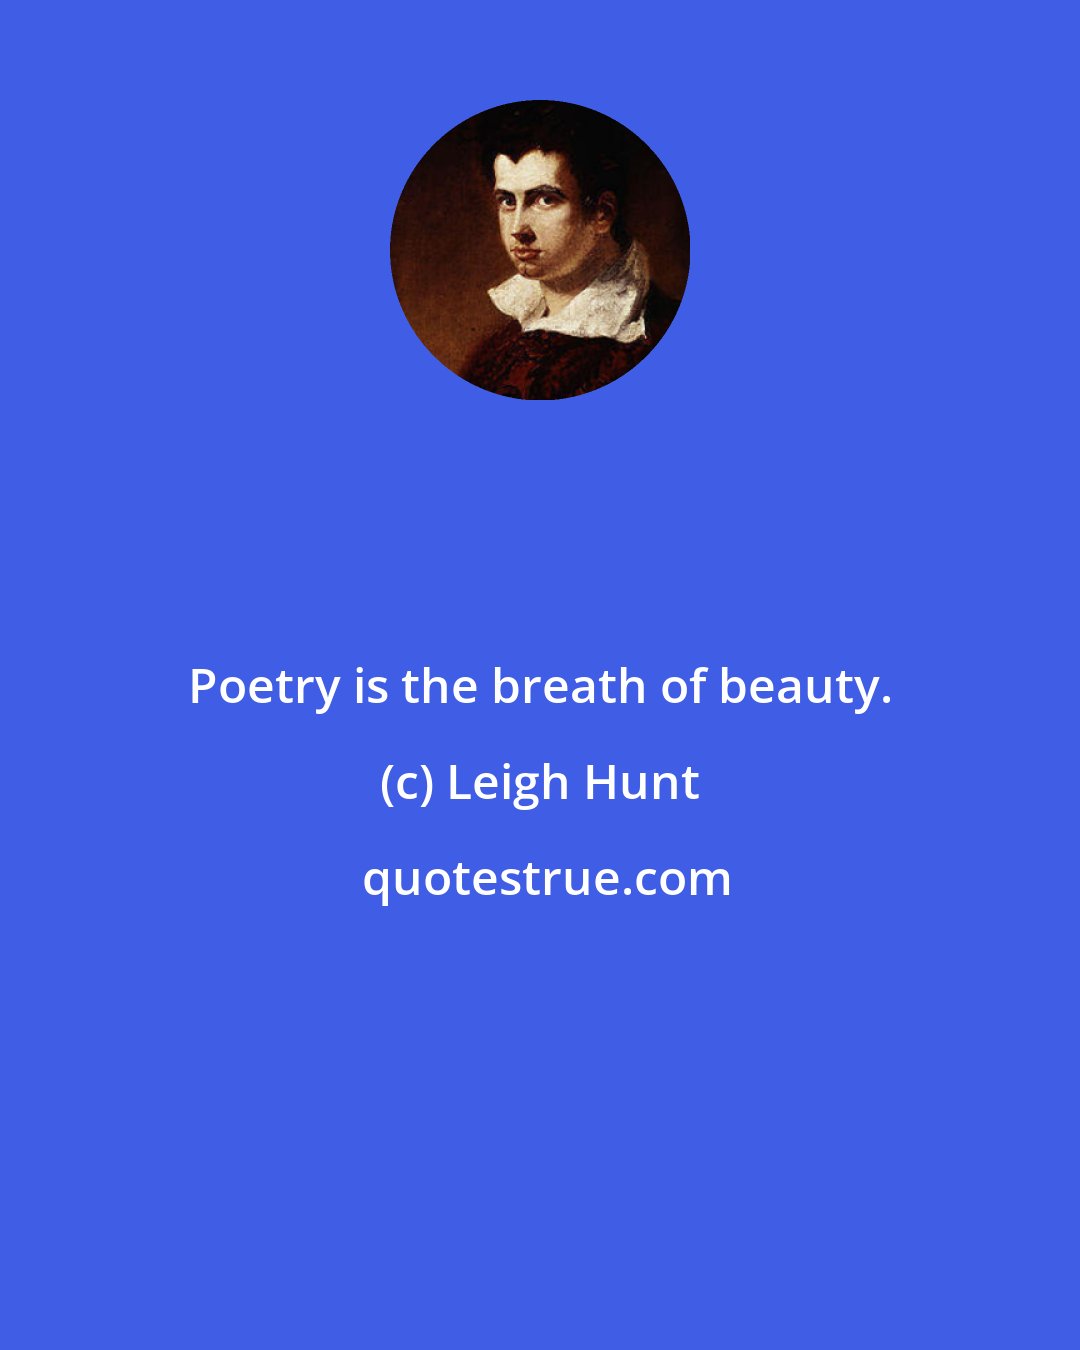 Leigh Hunt: Poetry is the breath of beauty.